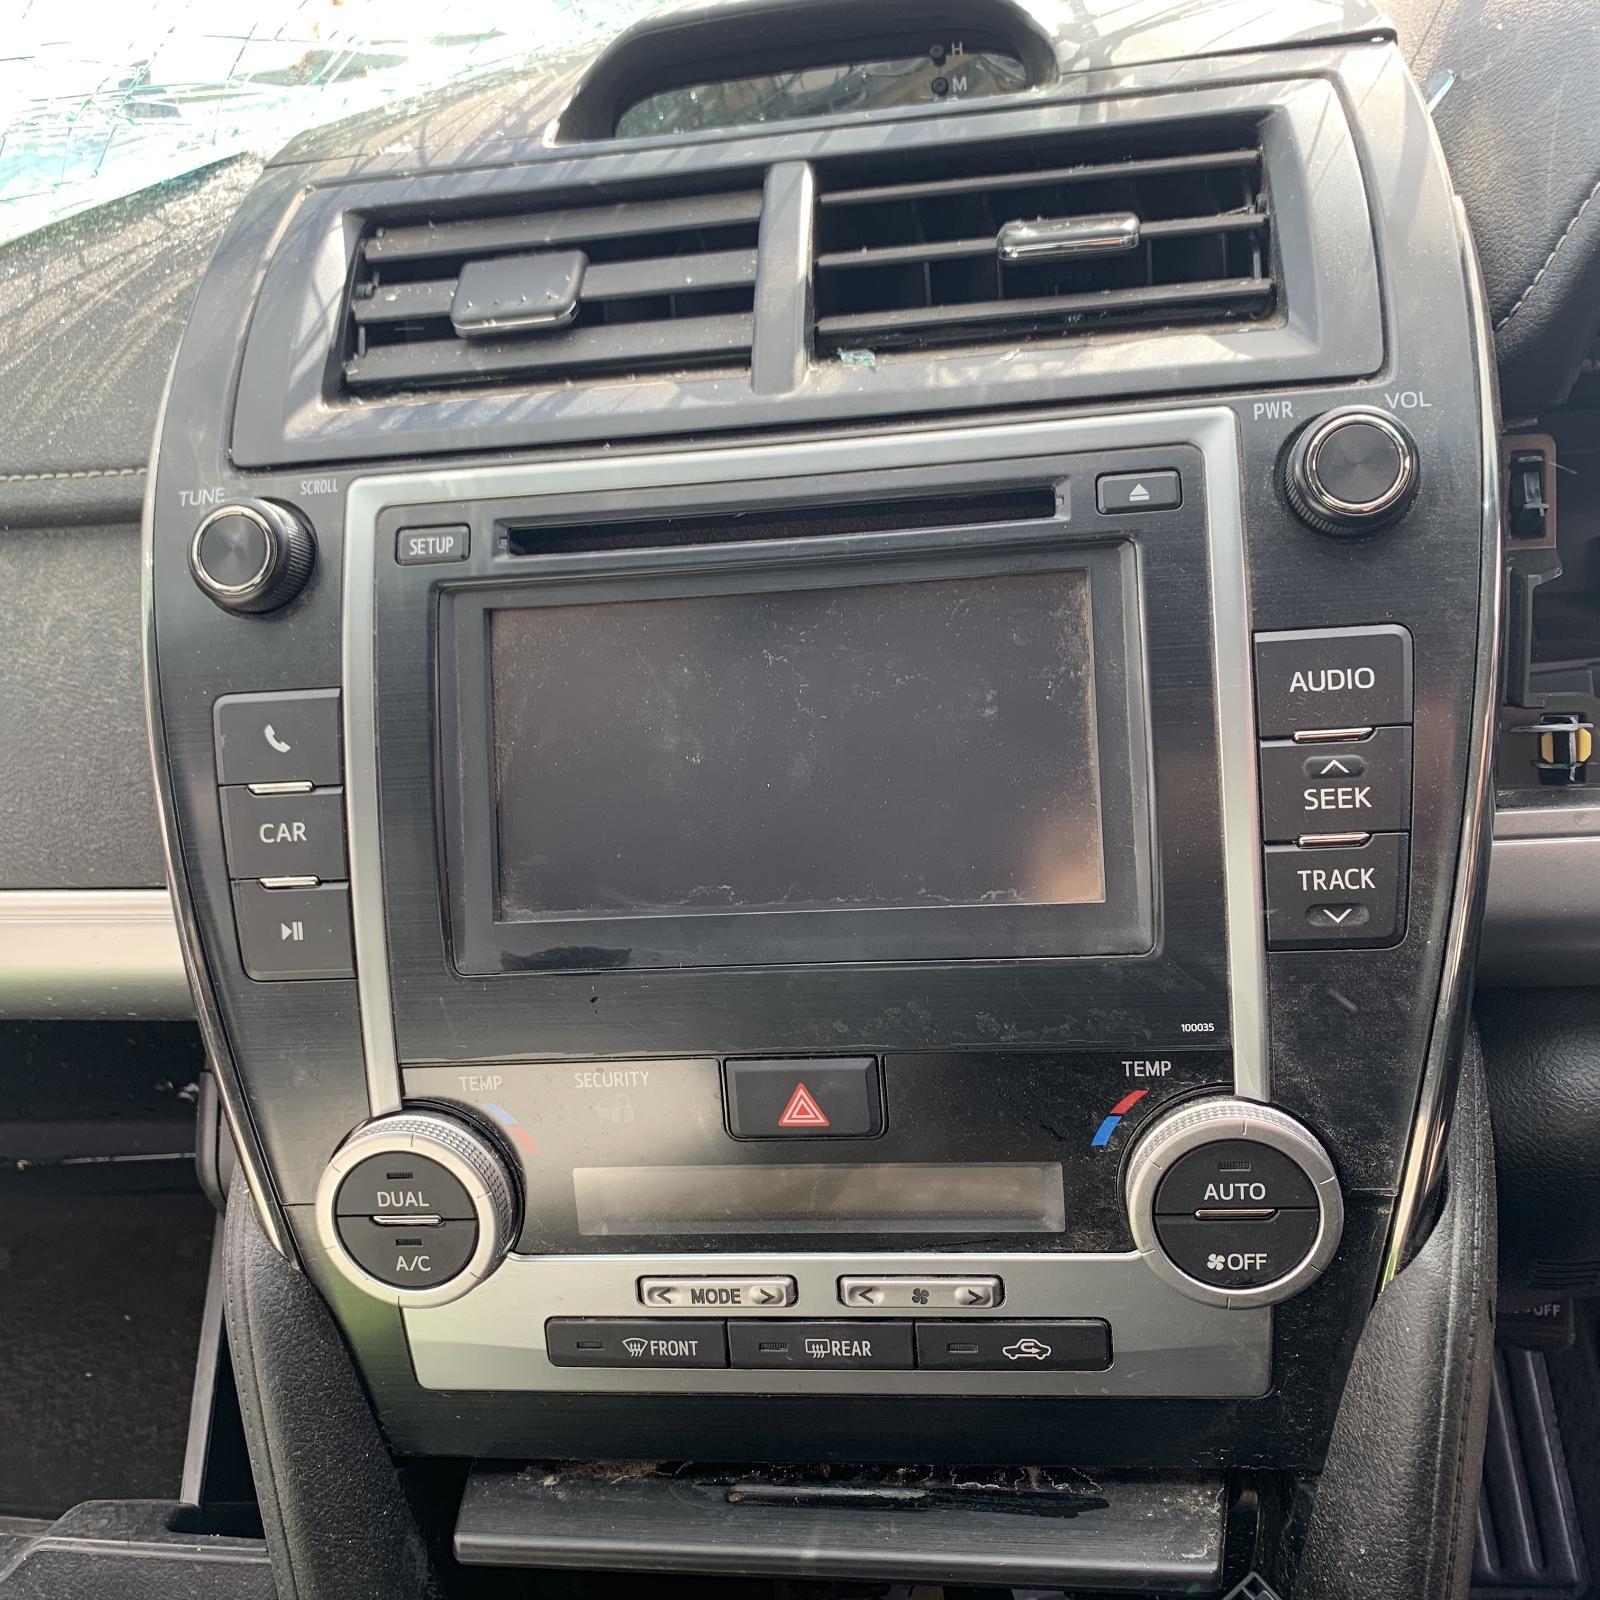 TOYOTA CAMRY, Radio/Cd/Dvd/Sat/Tv, CD PLAYER, TOUCH SCREEN, P/N ON FACE 100035, ACV50, 12/11-04/15